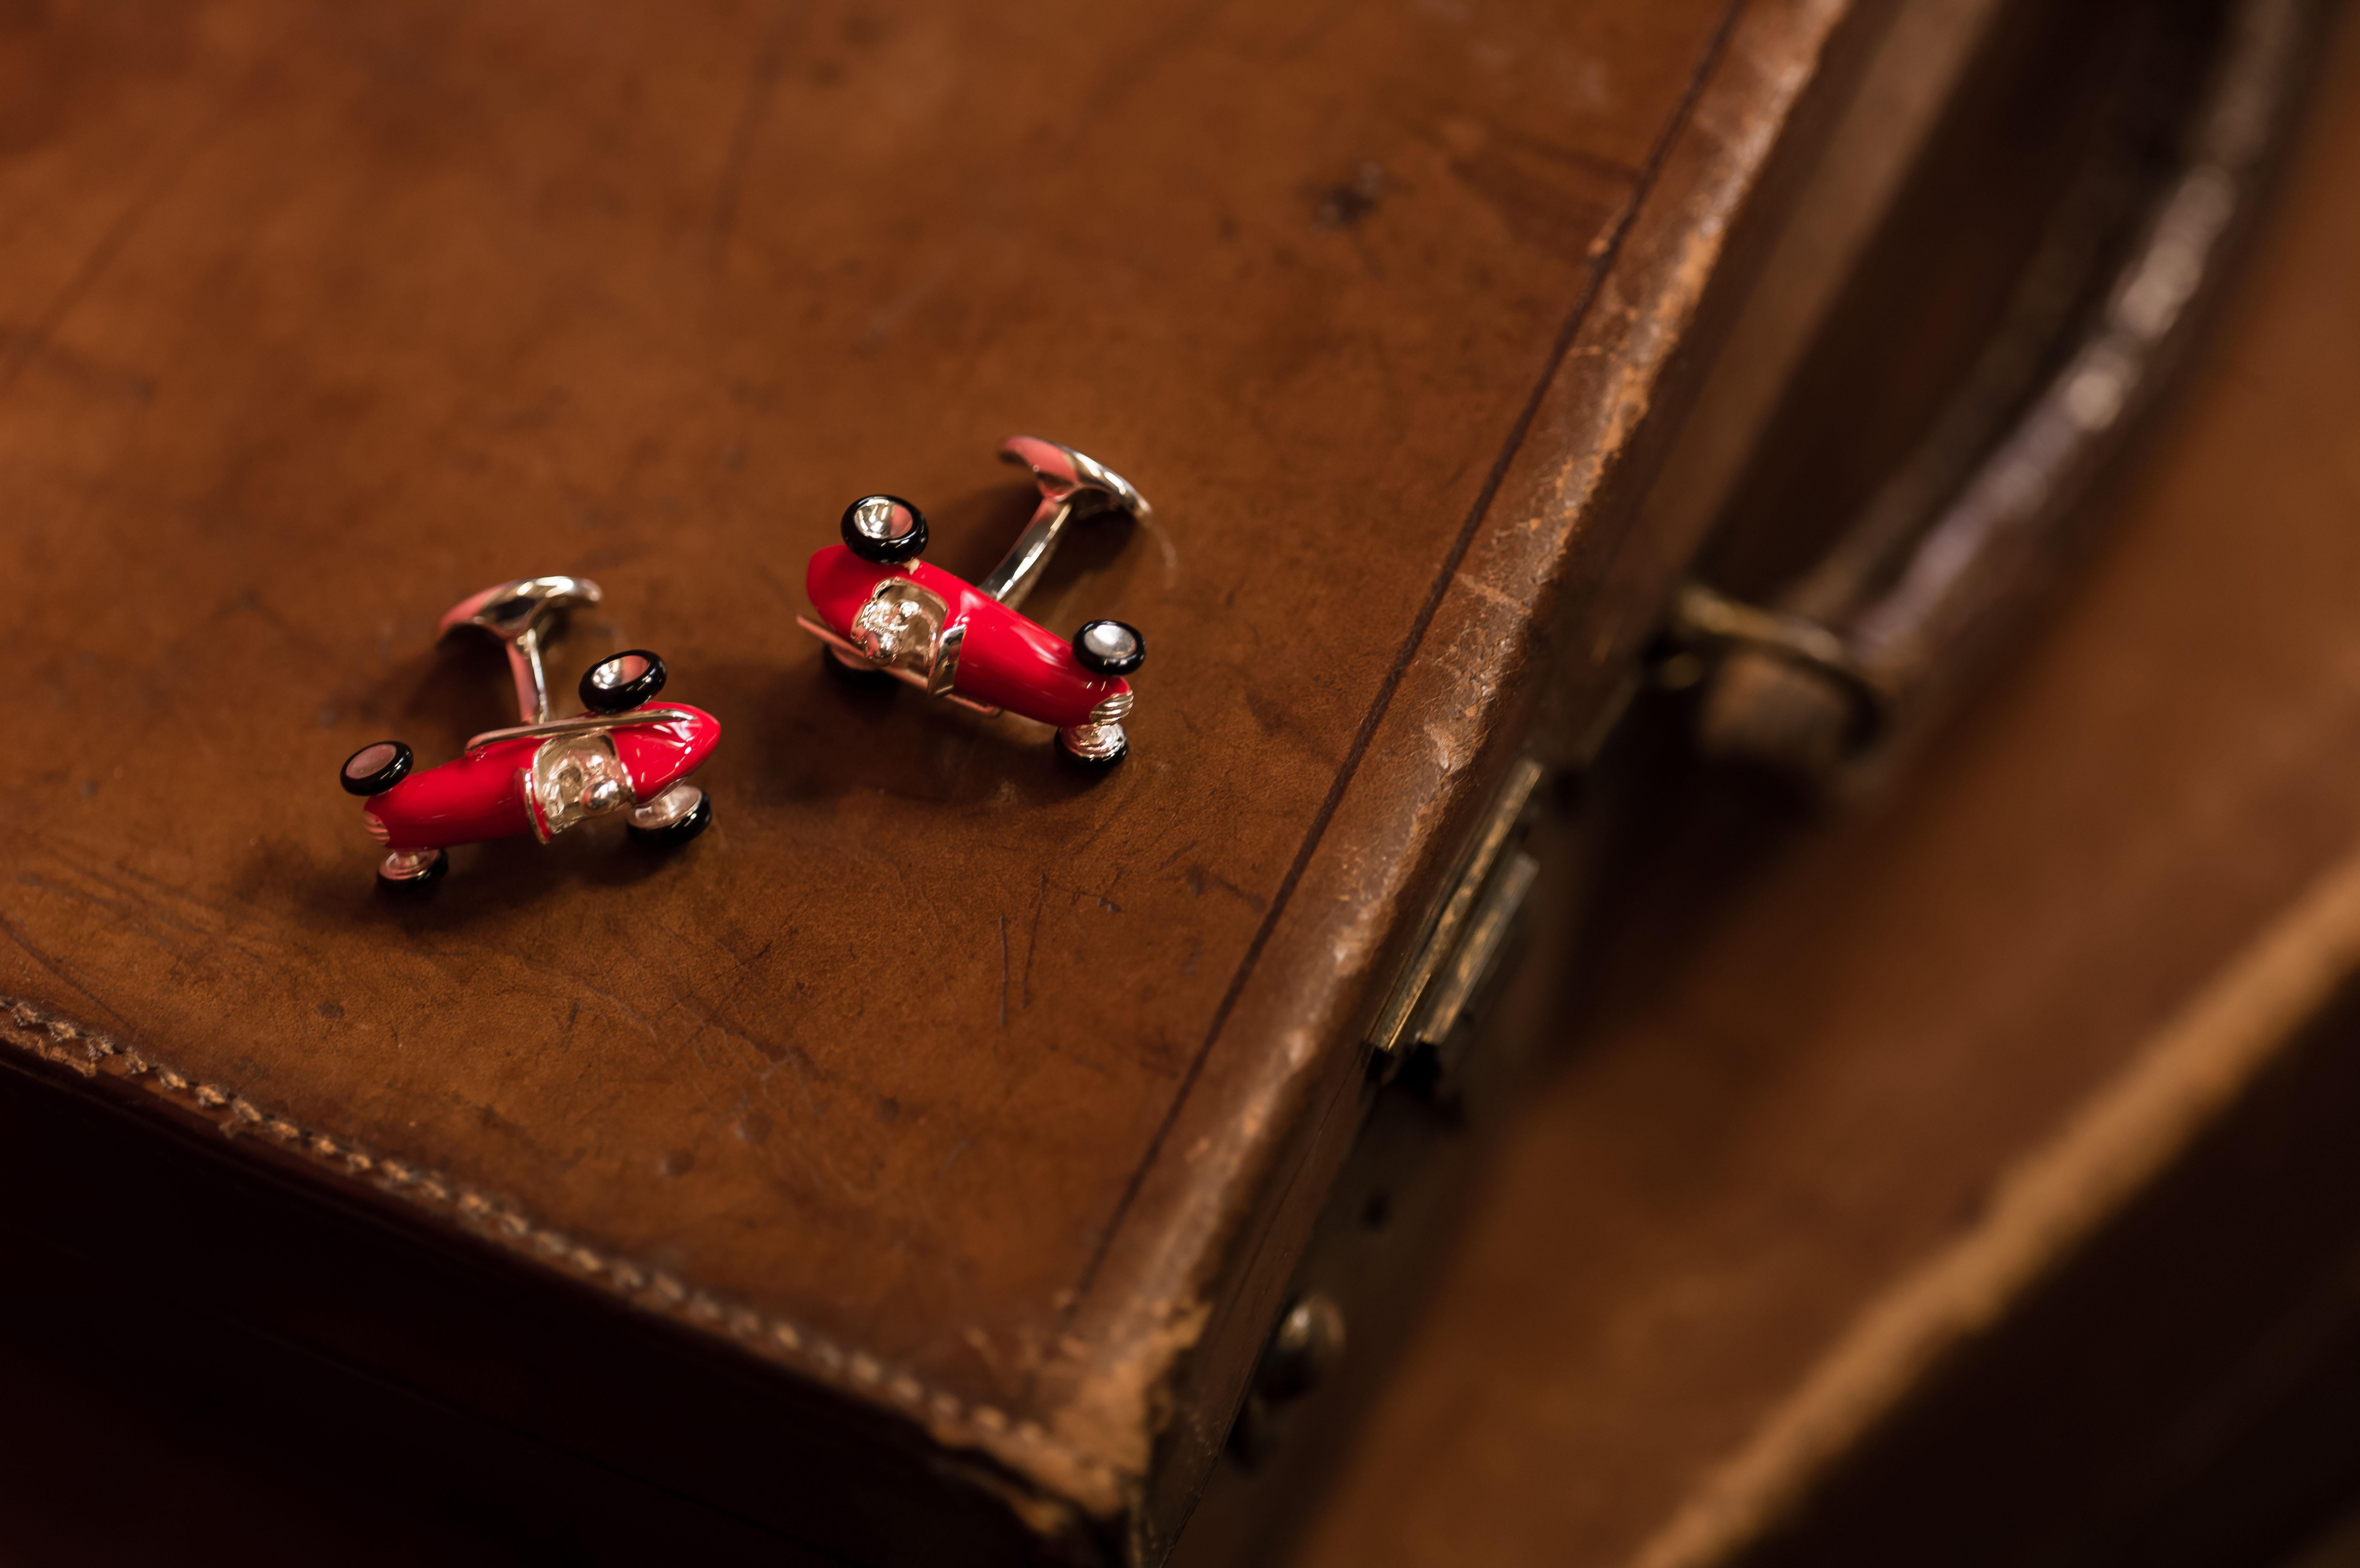 DEAKIN & FRANCIS, PICCADILLY ARCADE, LONDON.

Drive your style to victory!
As featured in The Sunday Times Style guide, these top selling racing car cufflinks are modelled on the vintage cars seen tearing around the track in the 1950! These